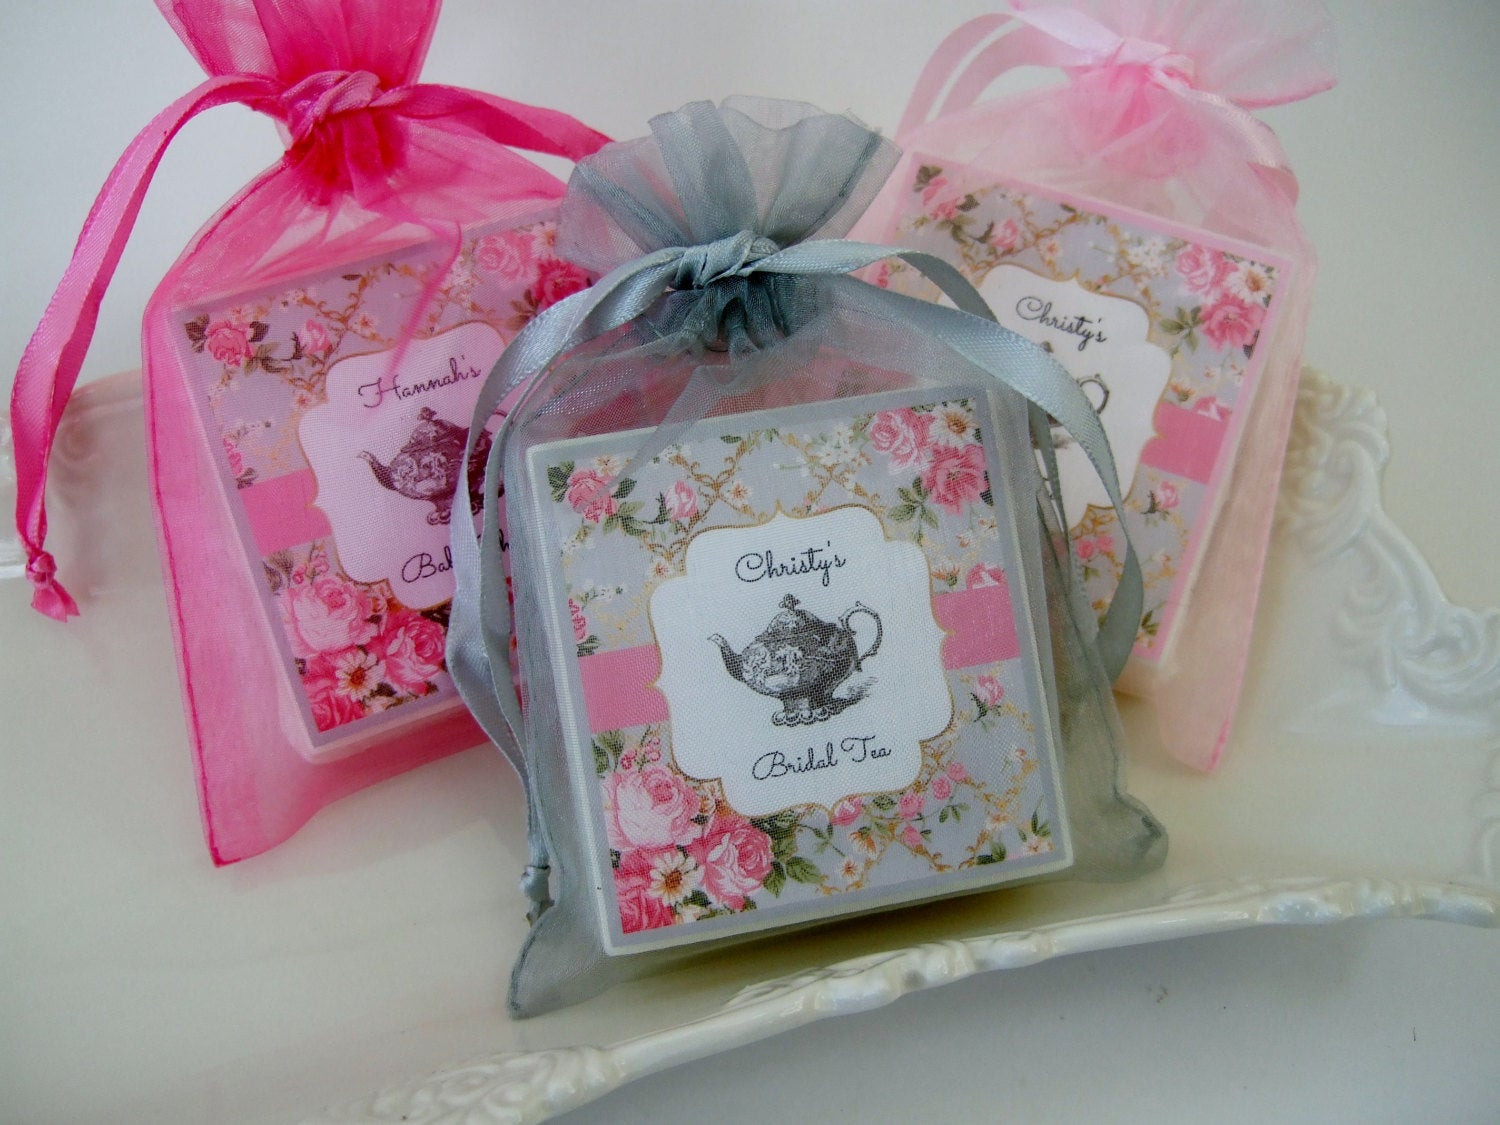 Party Favors For Baby Shower Ideas
 Tea Party Bridal Shower Favors Baby shower favors set of